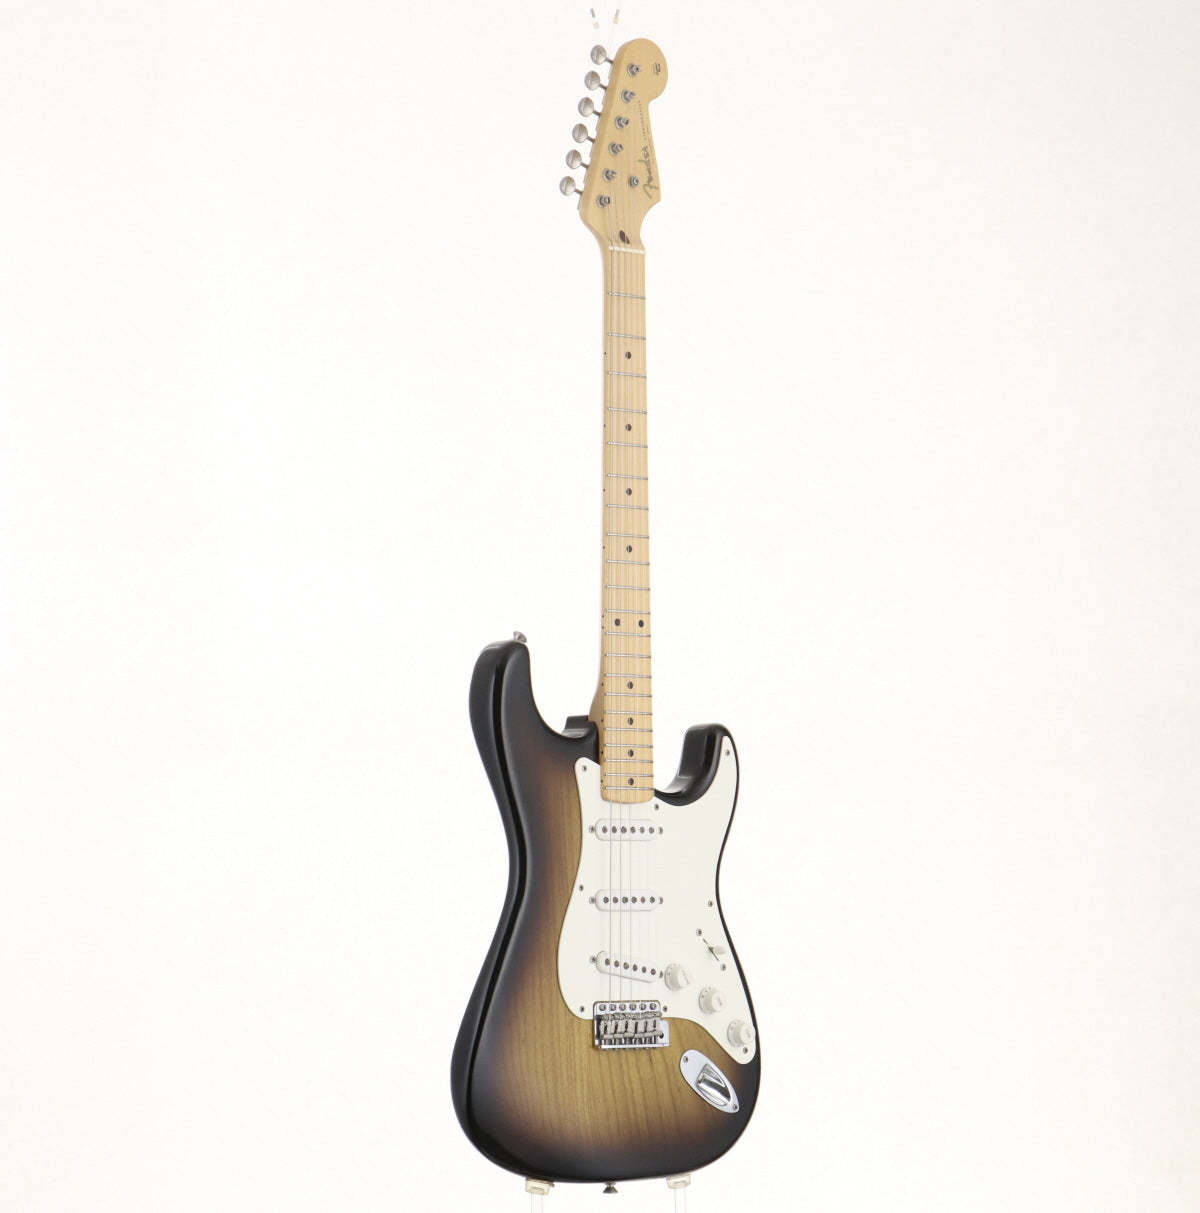 [SN 4653] USED Fender Custom Shop / MBS 50th Anniversary 1954 Stratocaster by Mark Kendrick, 2004 [09]